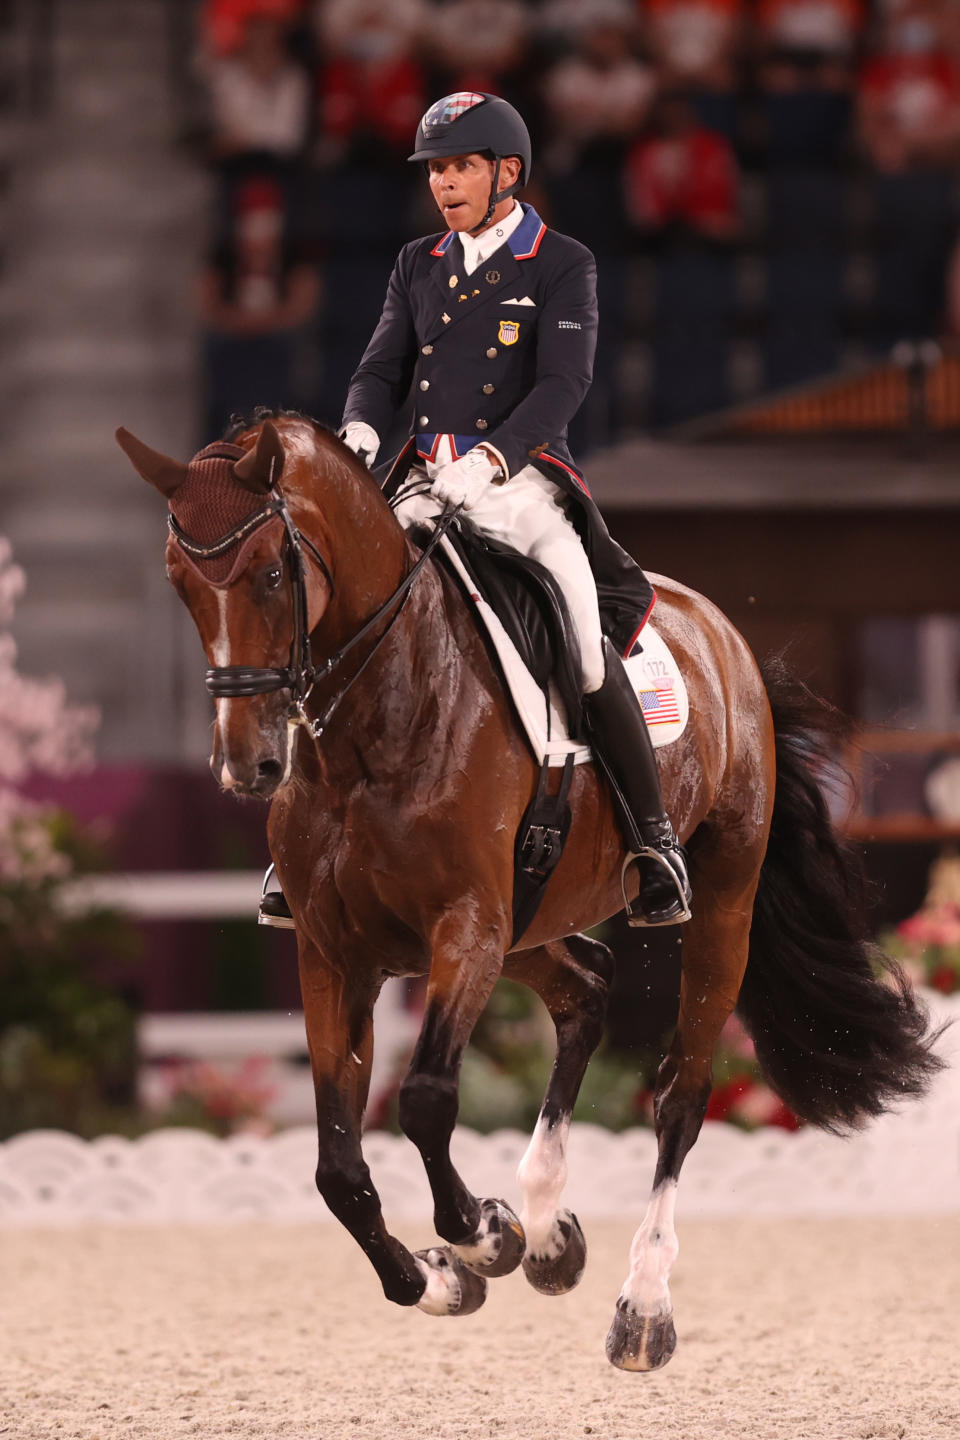 <p>TOKYO, JAPAN - JULY 27: Steffen Peters of Team USA riding Suppenkasper competes in the Dressage Team Grand Prix Special Team Final on day four of the Tokyo 2020 Olympic Games at Equestrian Park on July 27, 2021 in Tokyo, Japan. (Photo by Julian Finney/Getty Images)</p> 